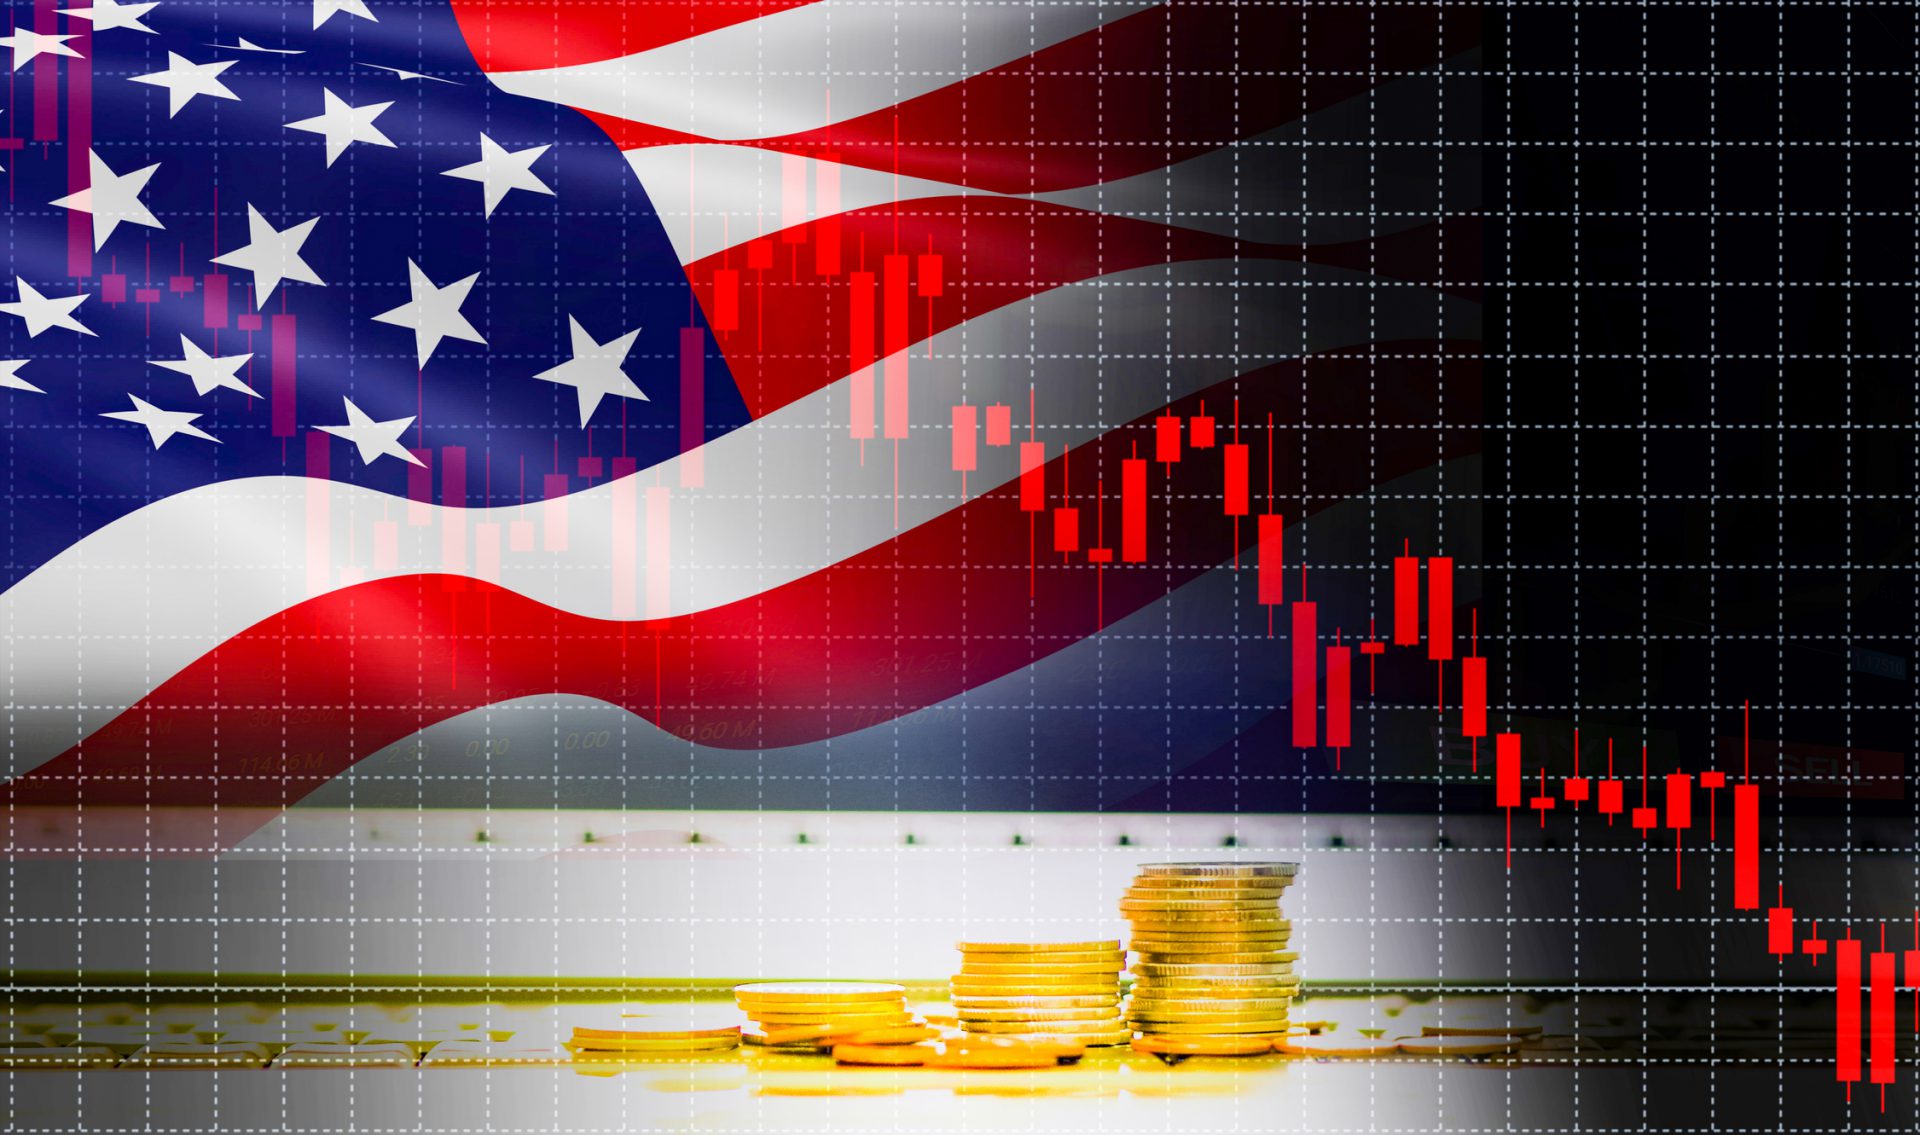 USA America flag candlestick graph background Stock market exchange analysis / indicator of changes graph chart business finance money investment